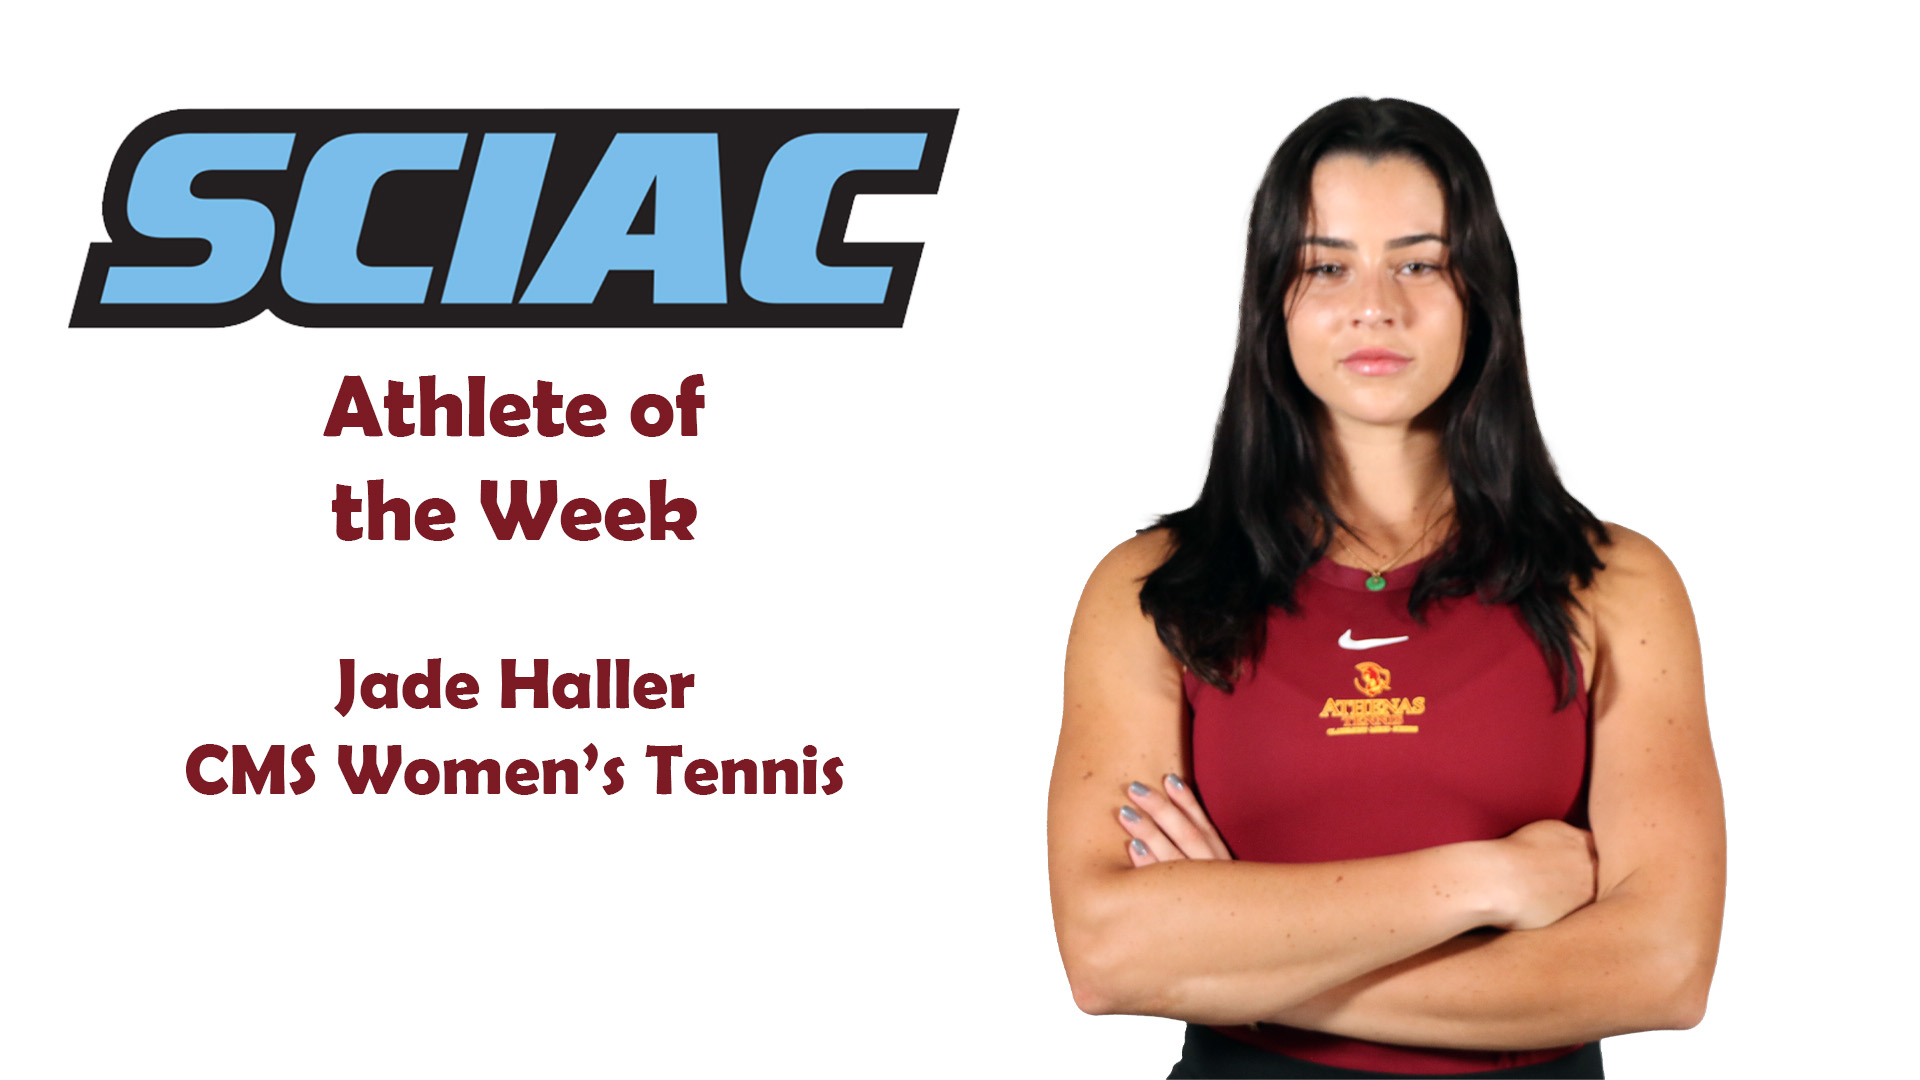 posed shot of Jade Haller with the SCIAC logo